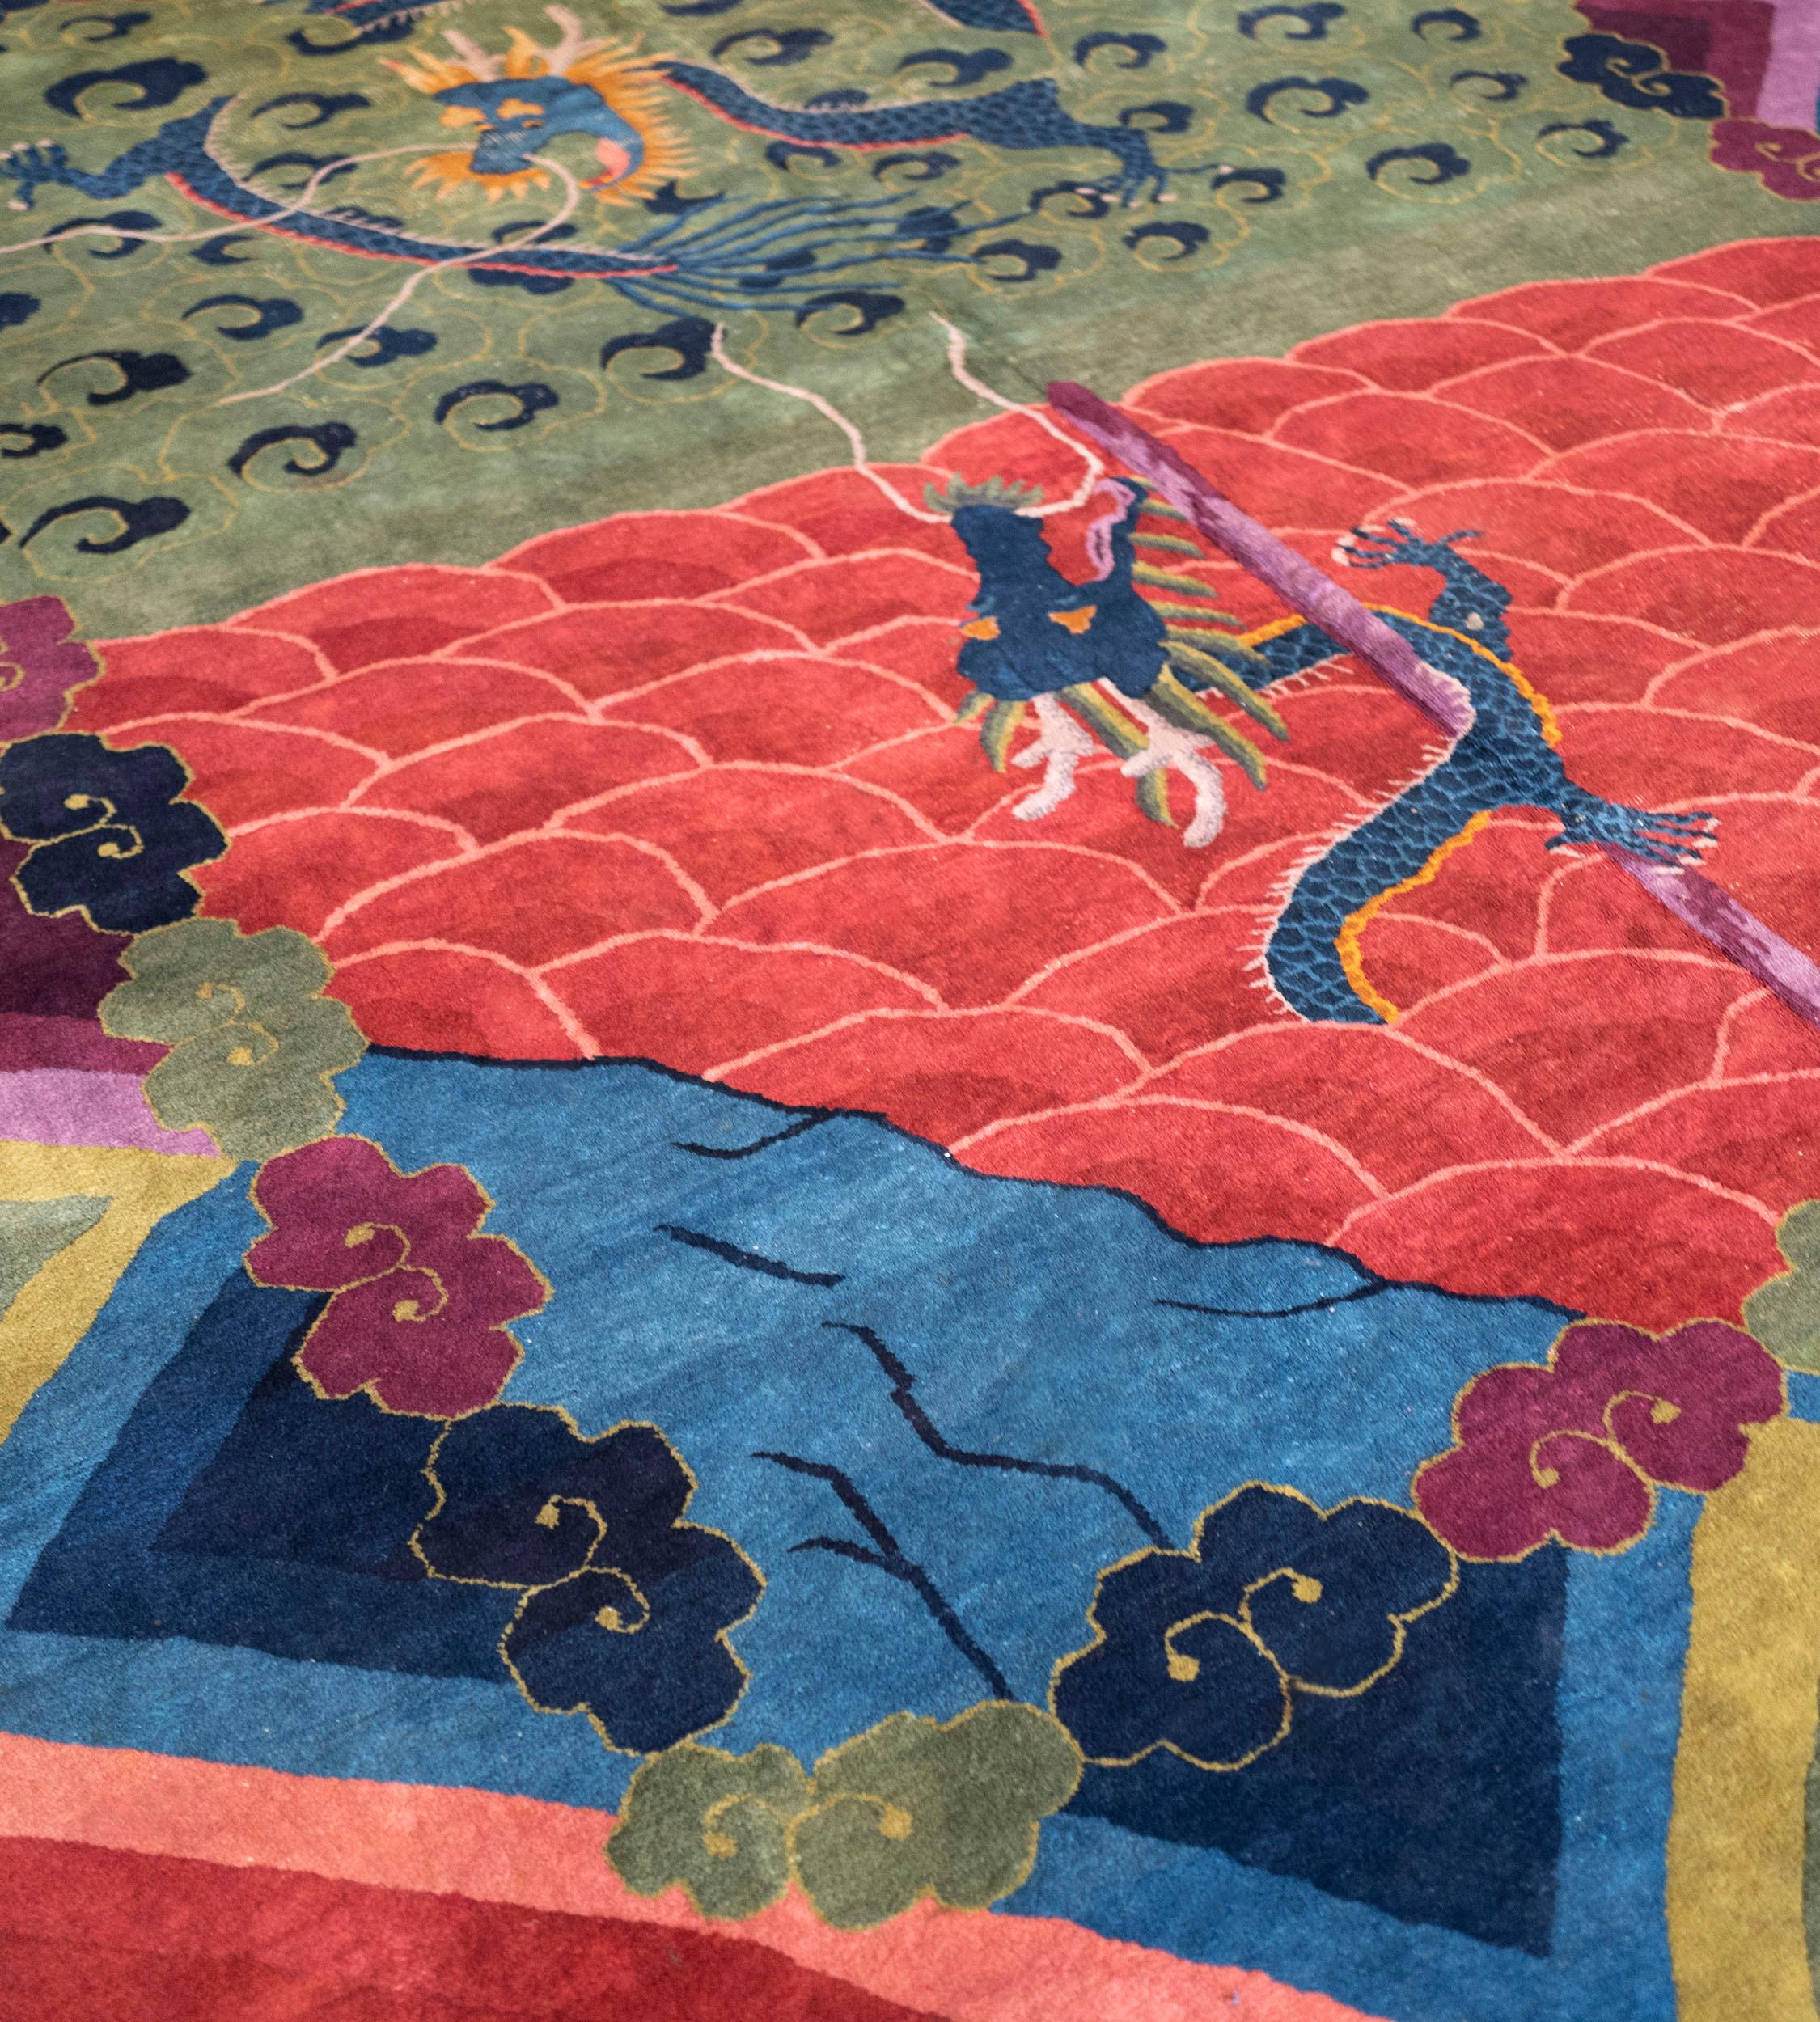 Hand-Woven Early 20th Century Colorful Handwoven Wool Chinese Rug For Sale